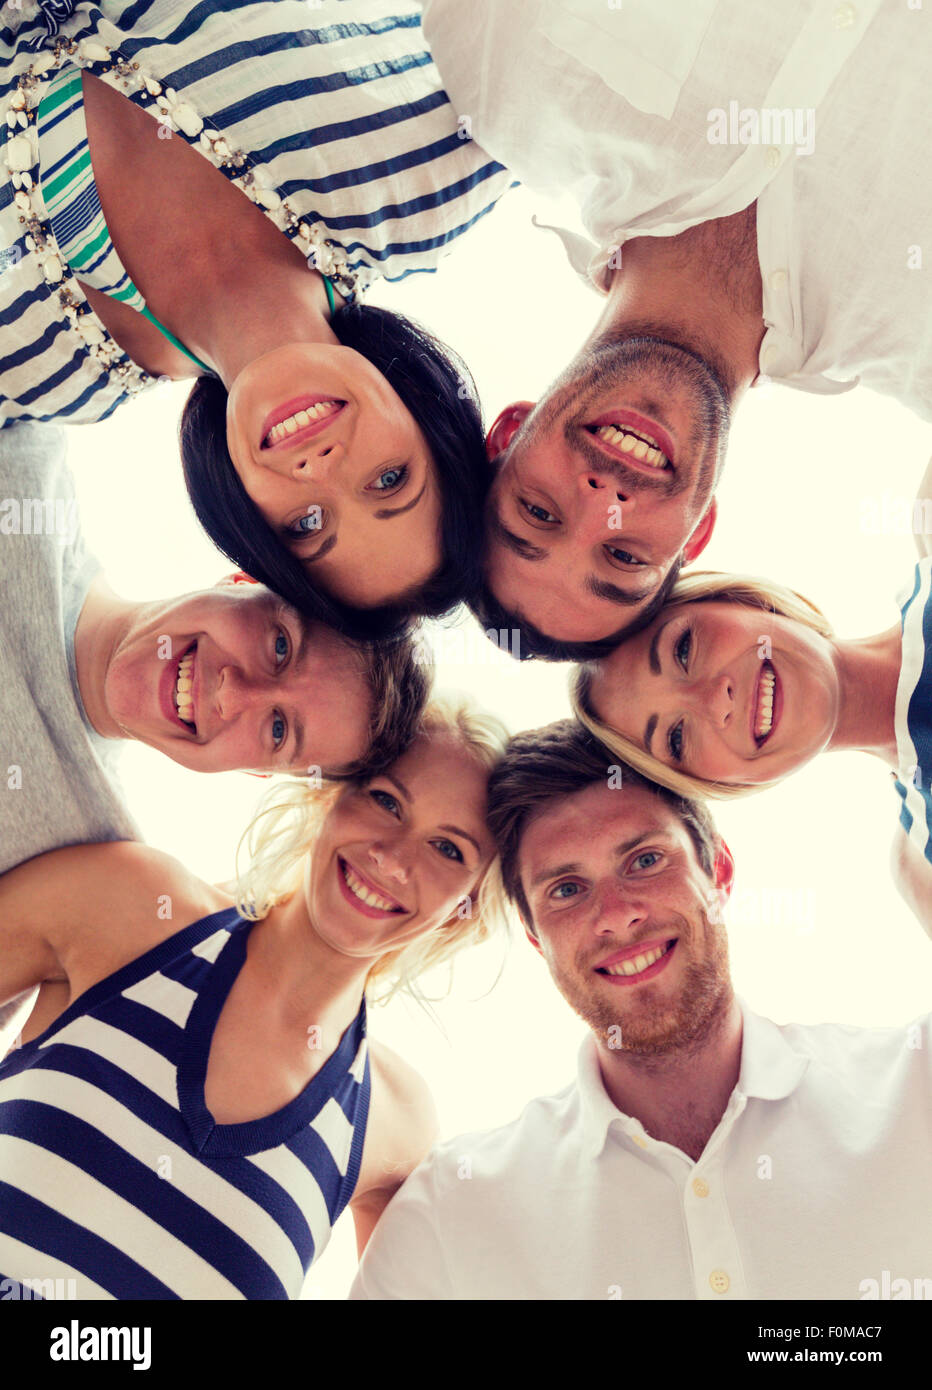 smiling friends in circle Stock Photo